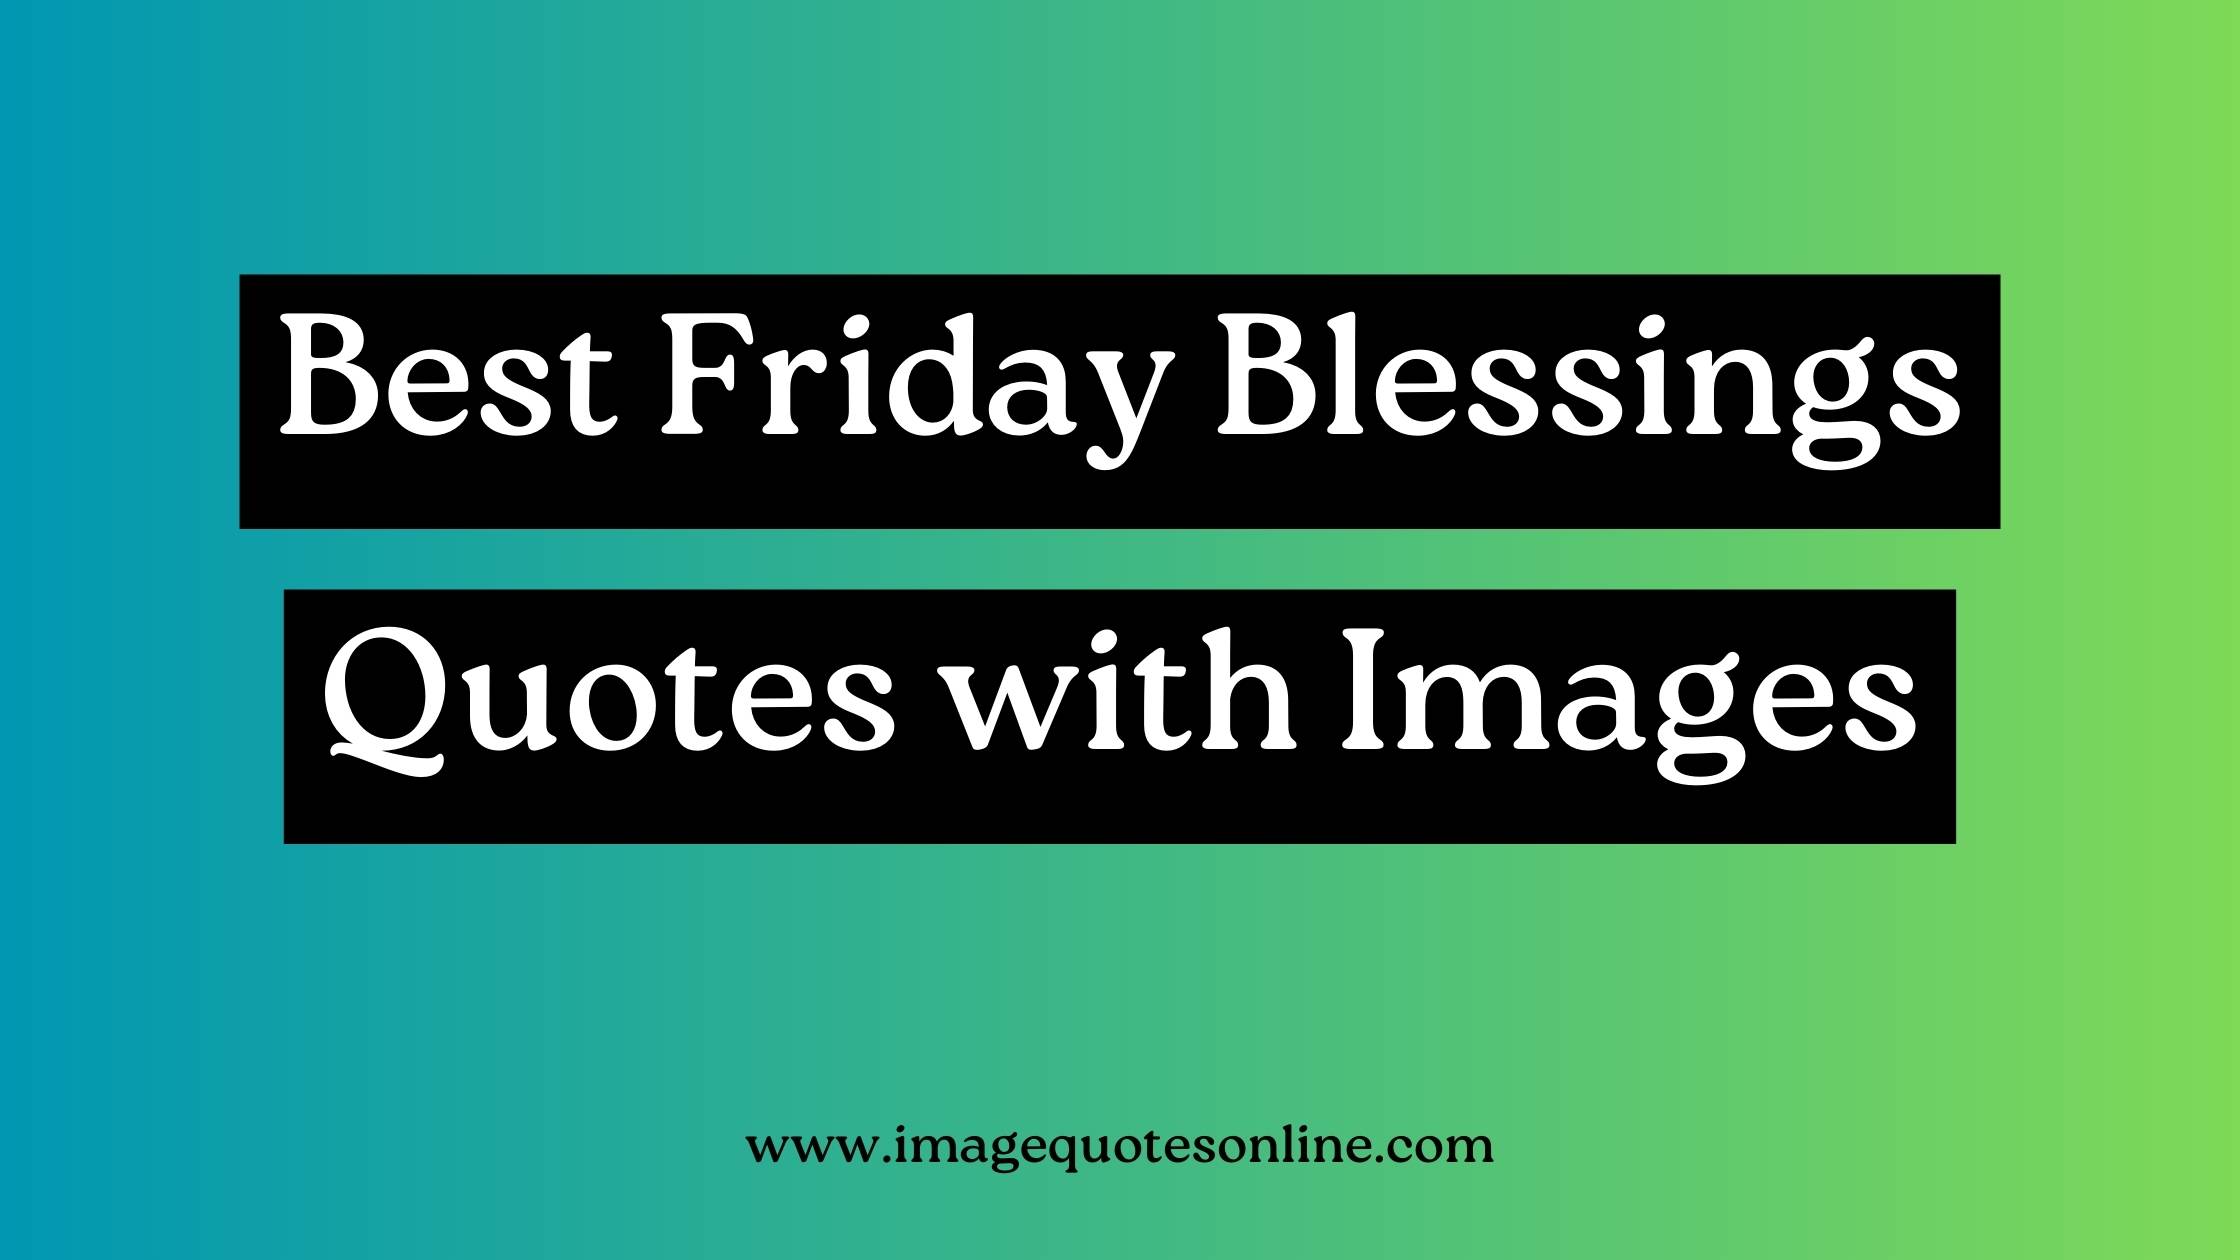 friday blessings images and quotes